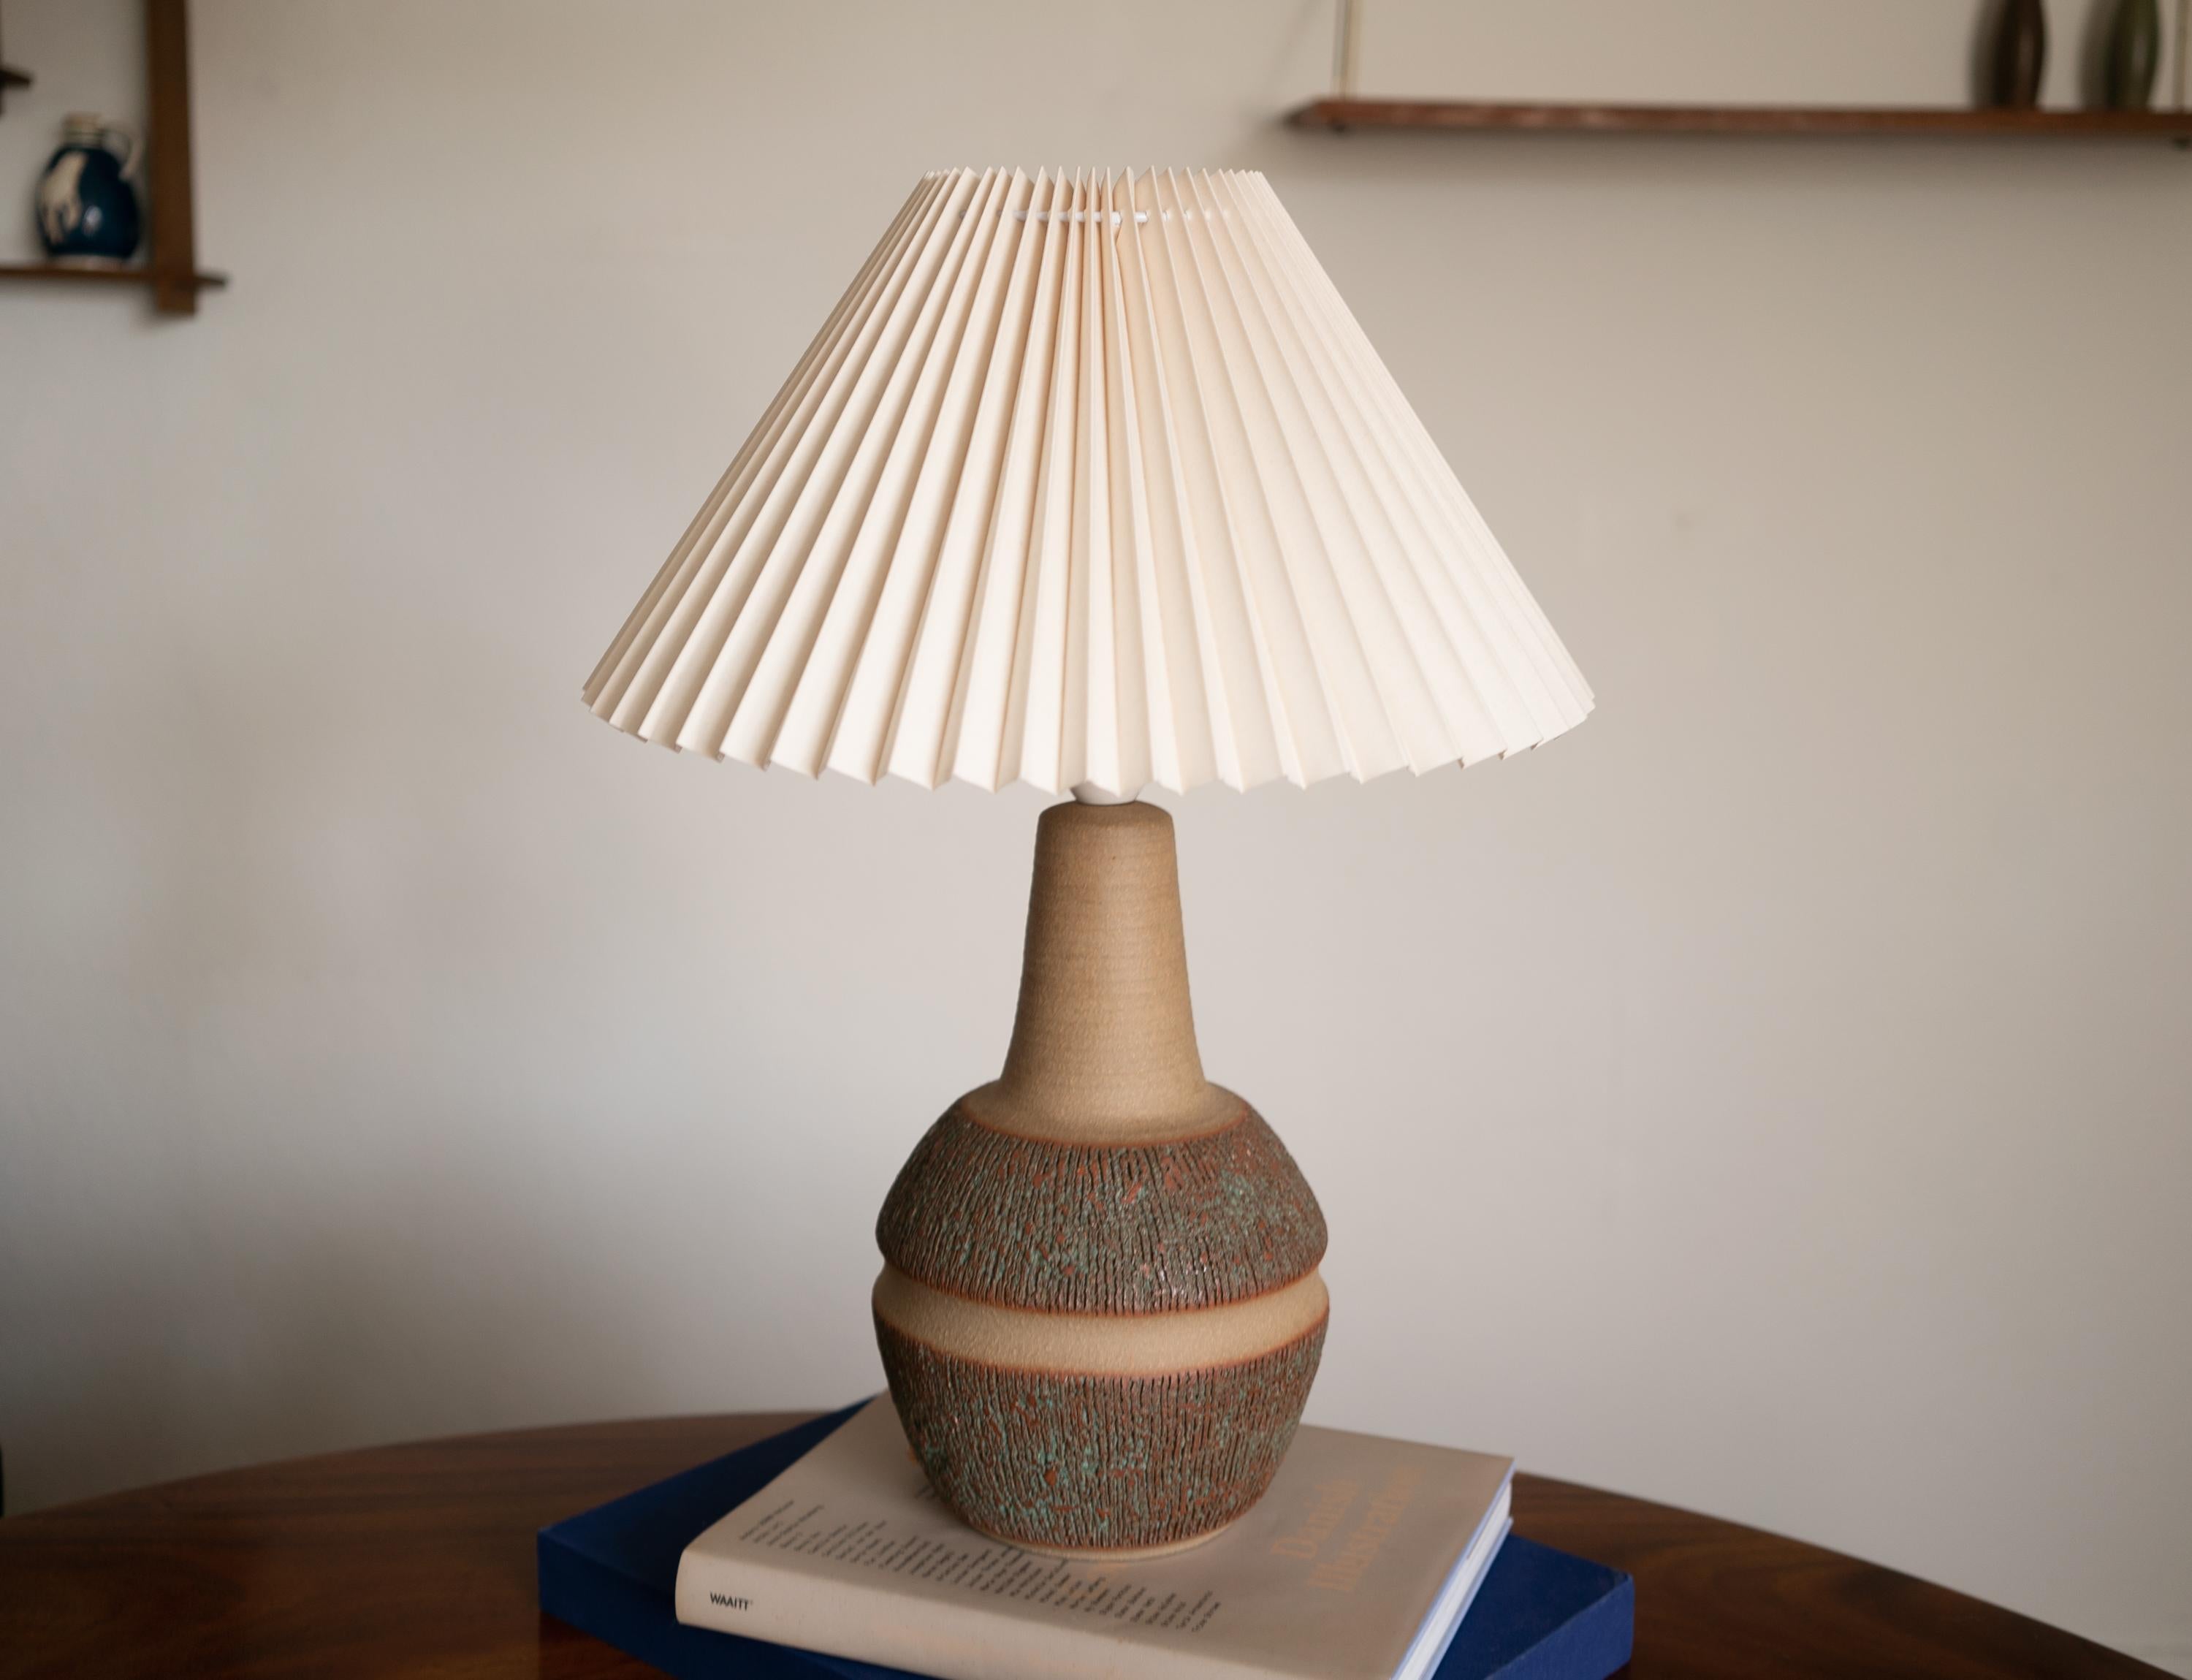 Small table lamp by Einar Johansen for Søholm Stentøj, Denmark, 1960s.

Stamped and signed on the base.

Sold without lampshade. Height includes socket. Fully functional and in beautiful condition.